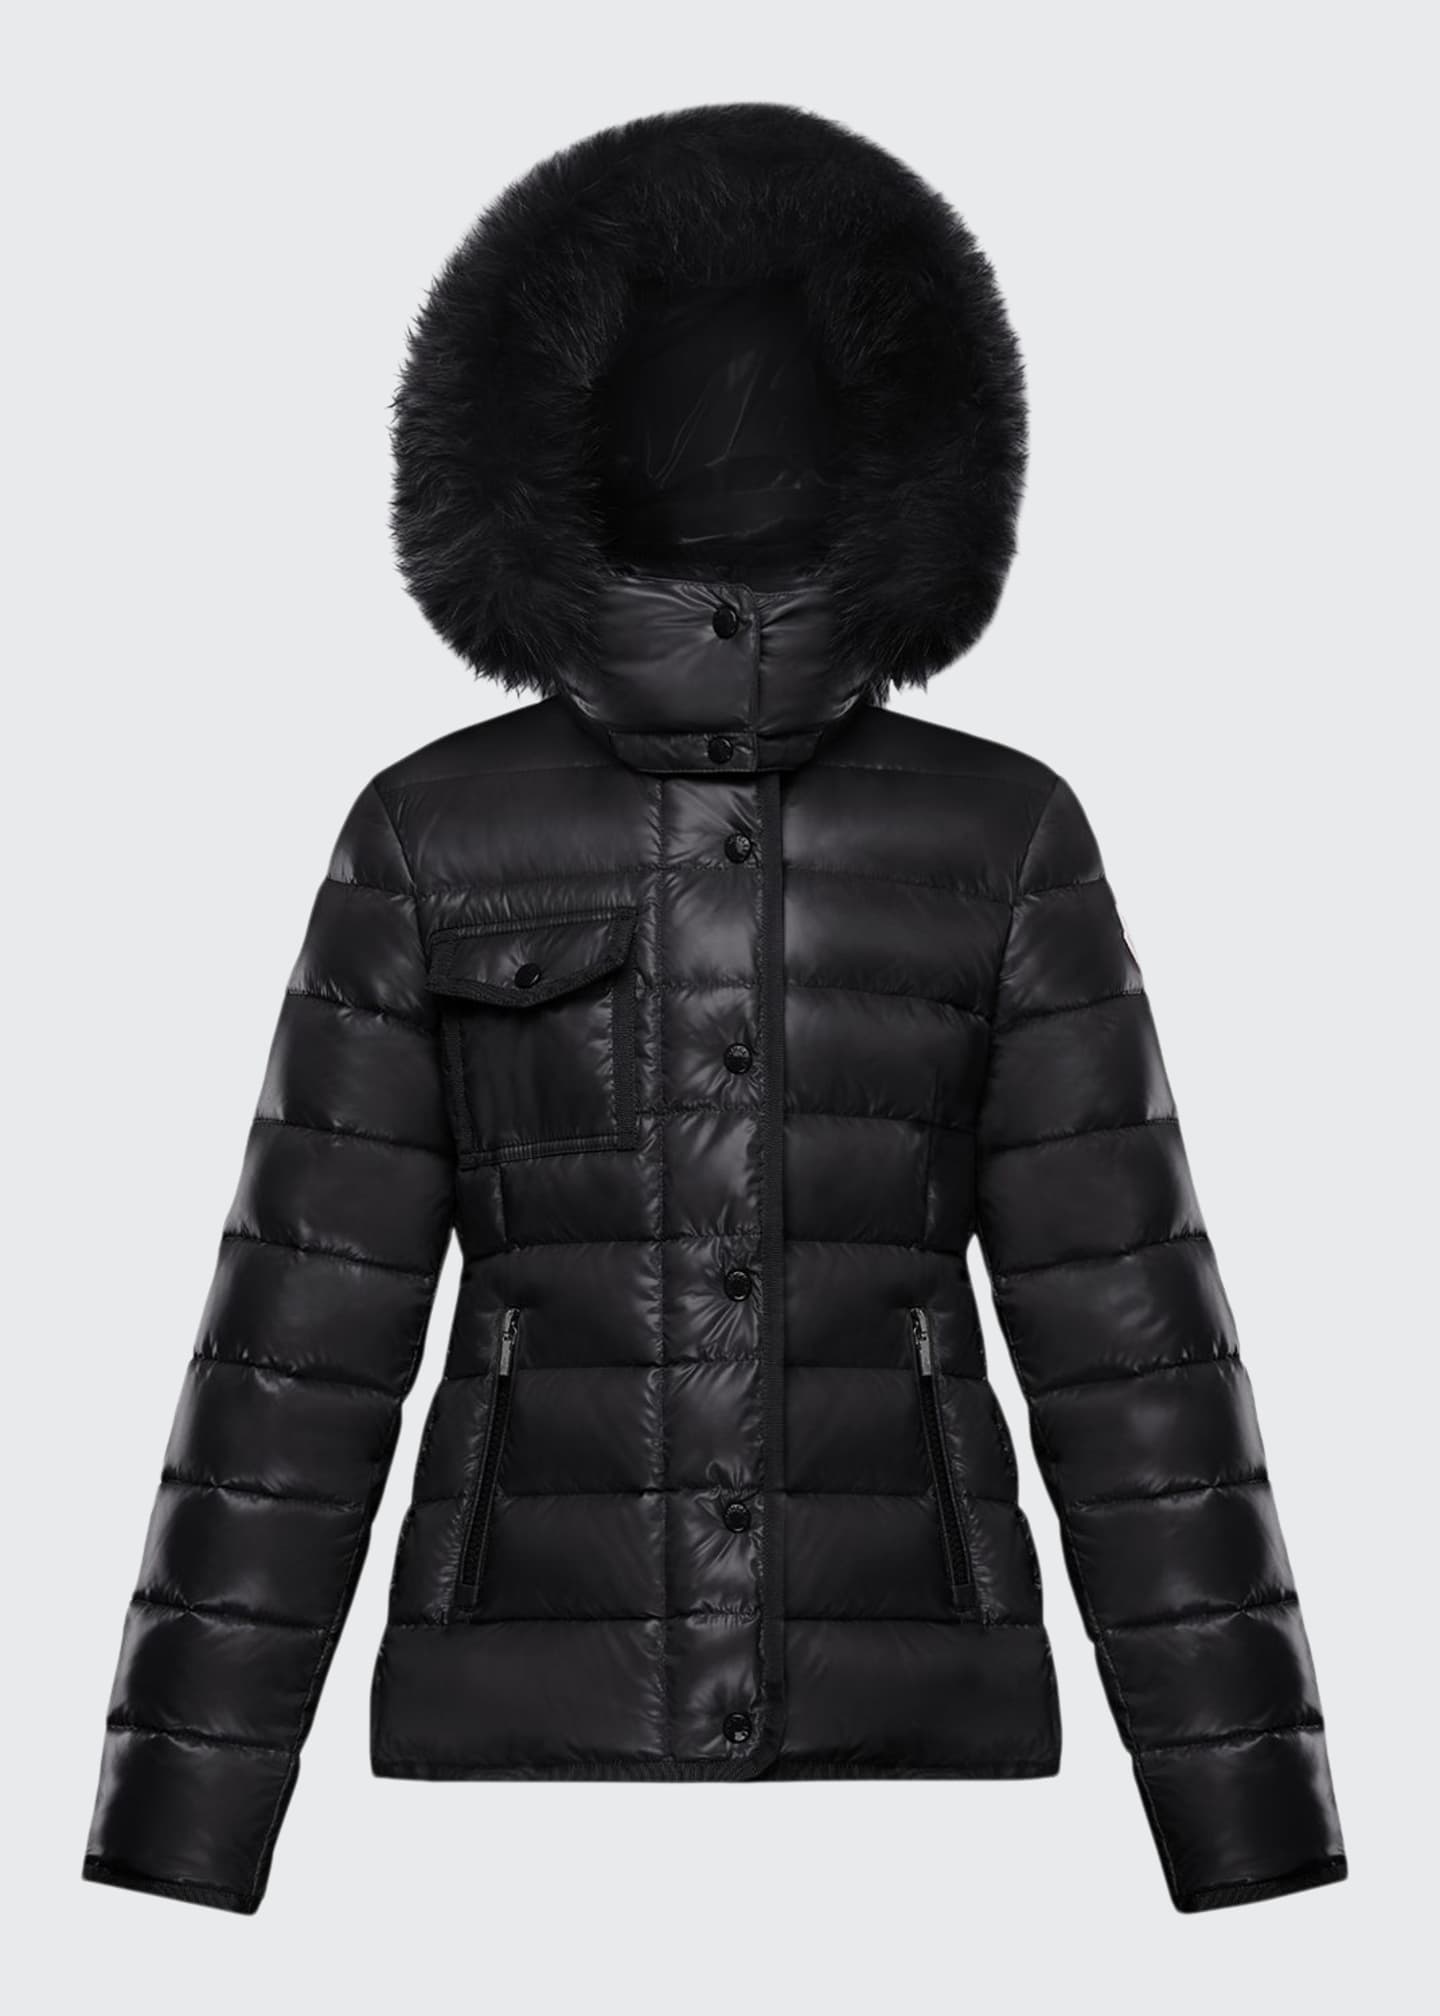 Moncler Armoise Quilted Puffer Jacket w/ Fur-Trim Hood, Size 4-6